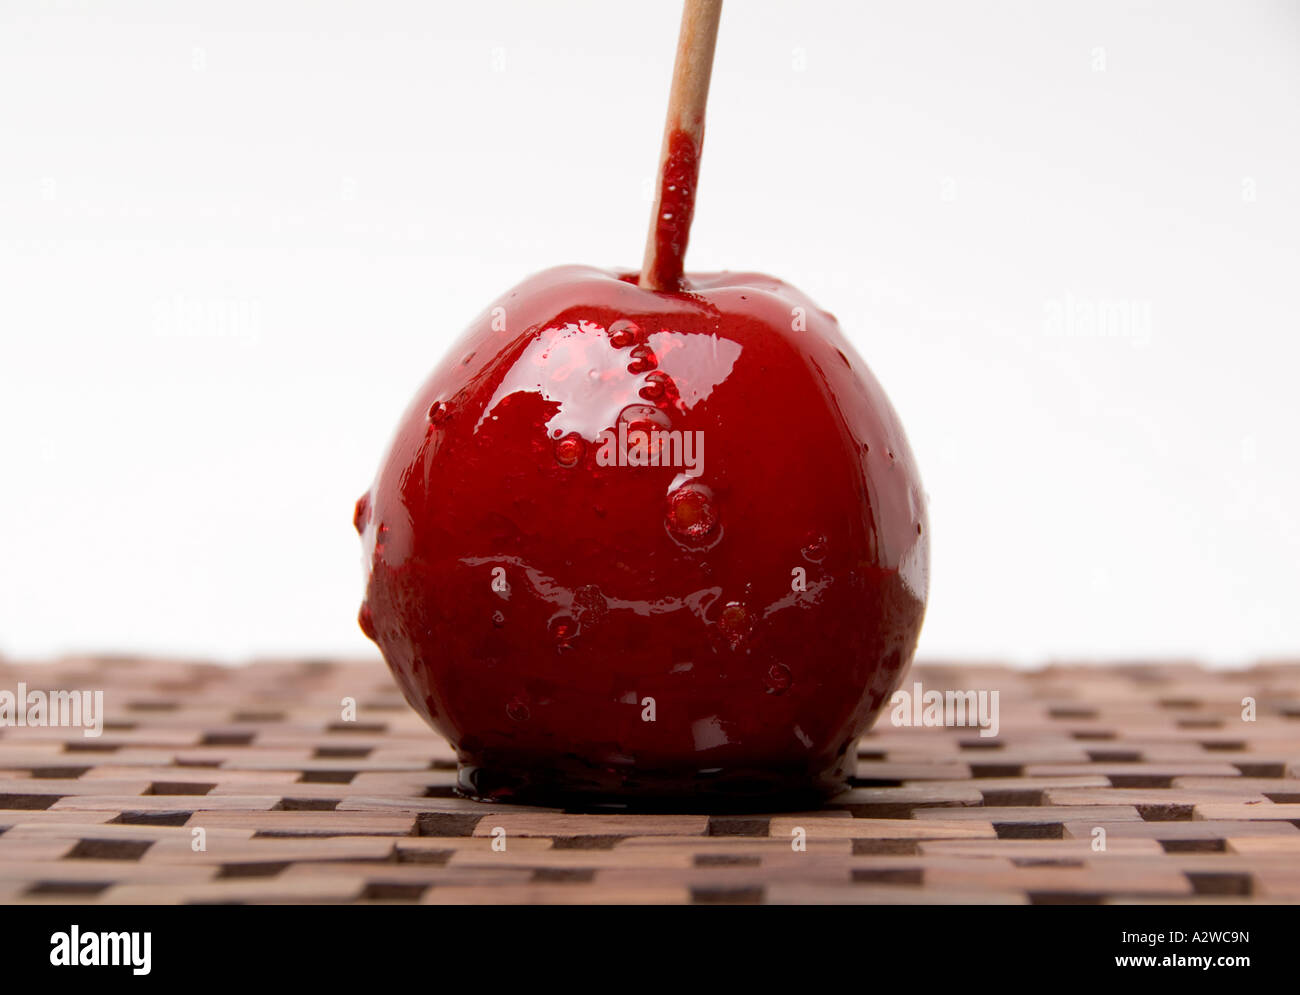 Red Candy Apple High Resolution Stock Photography and Images - Alamy